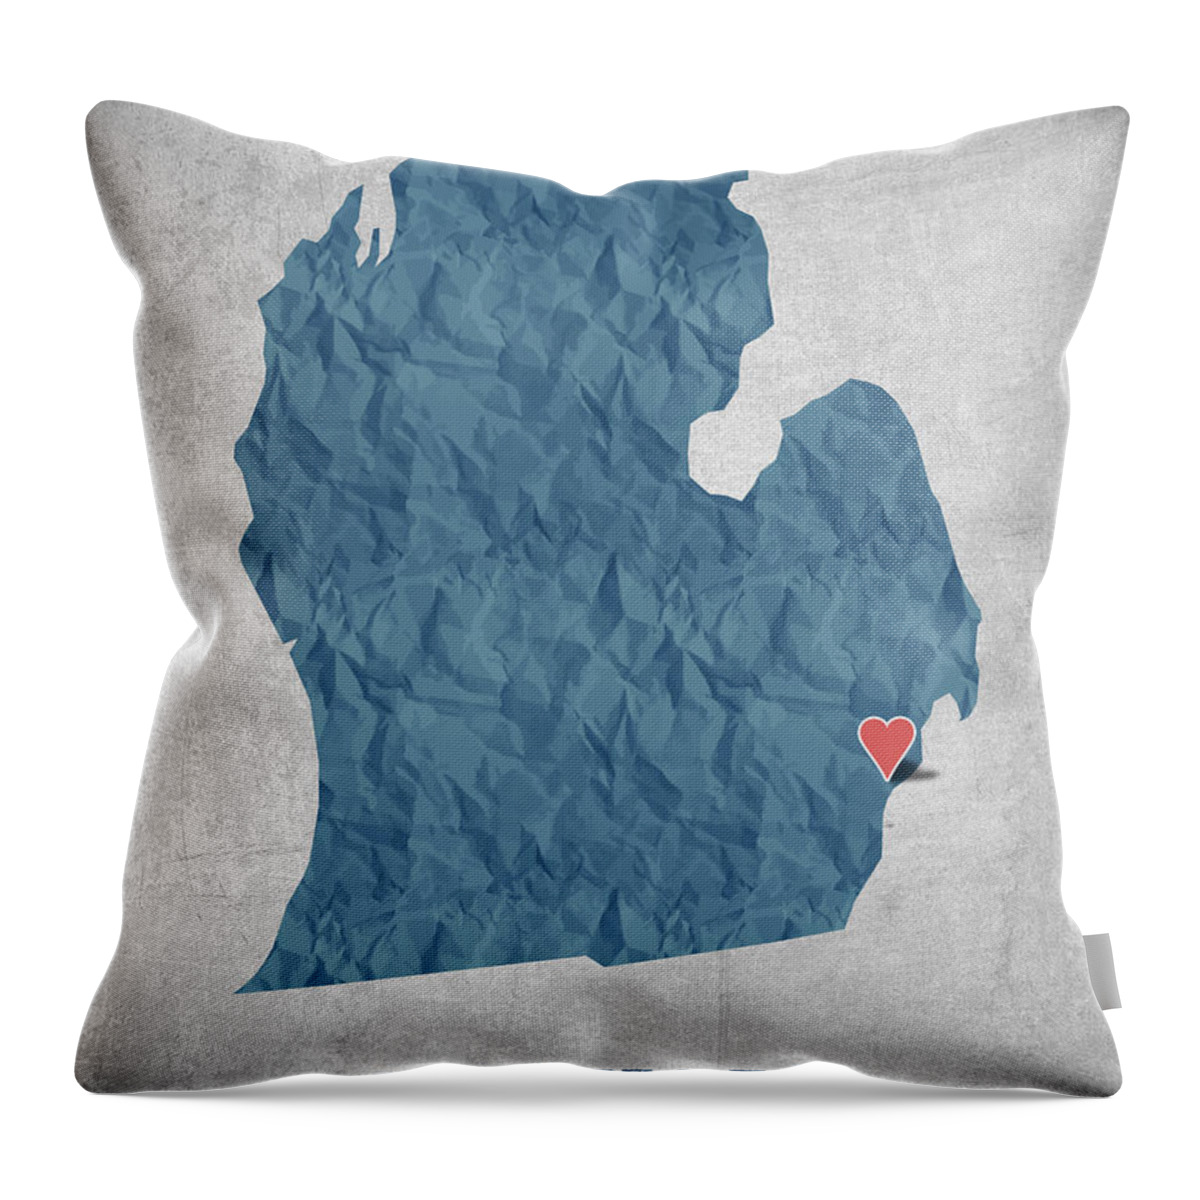 Detroit Throw Pillow featuring the digital art I love Detroit Michigan - Blue by Aged Pixel